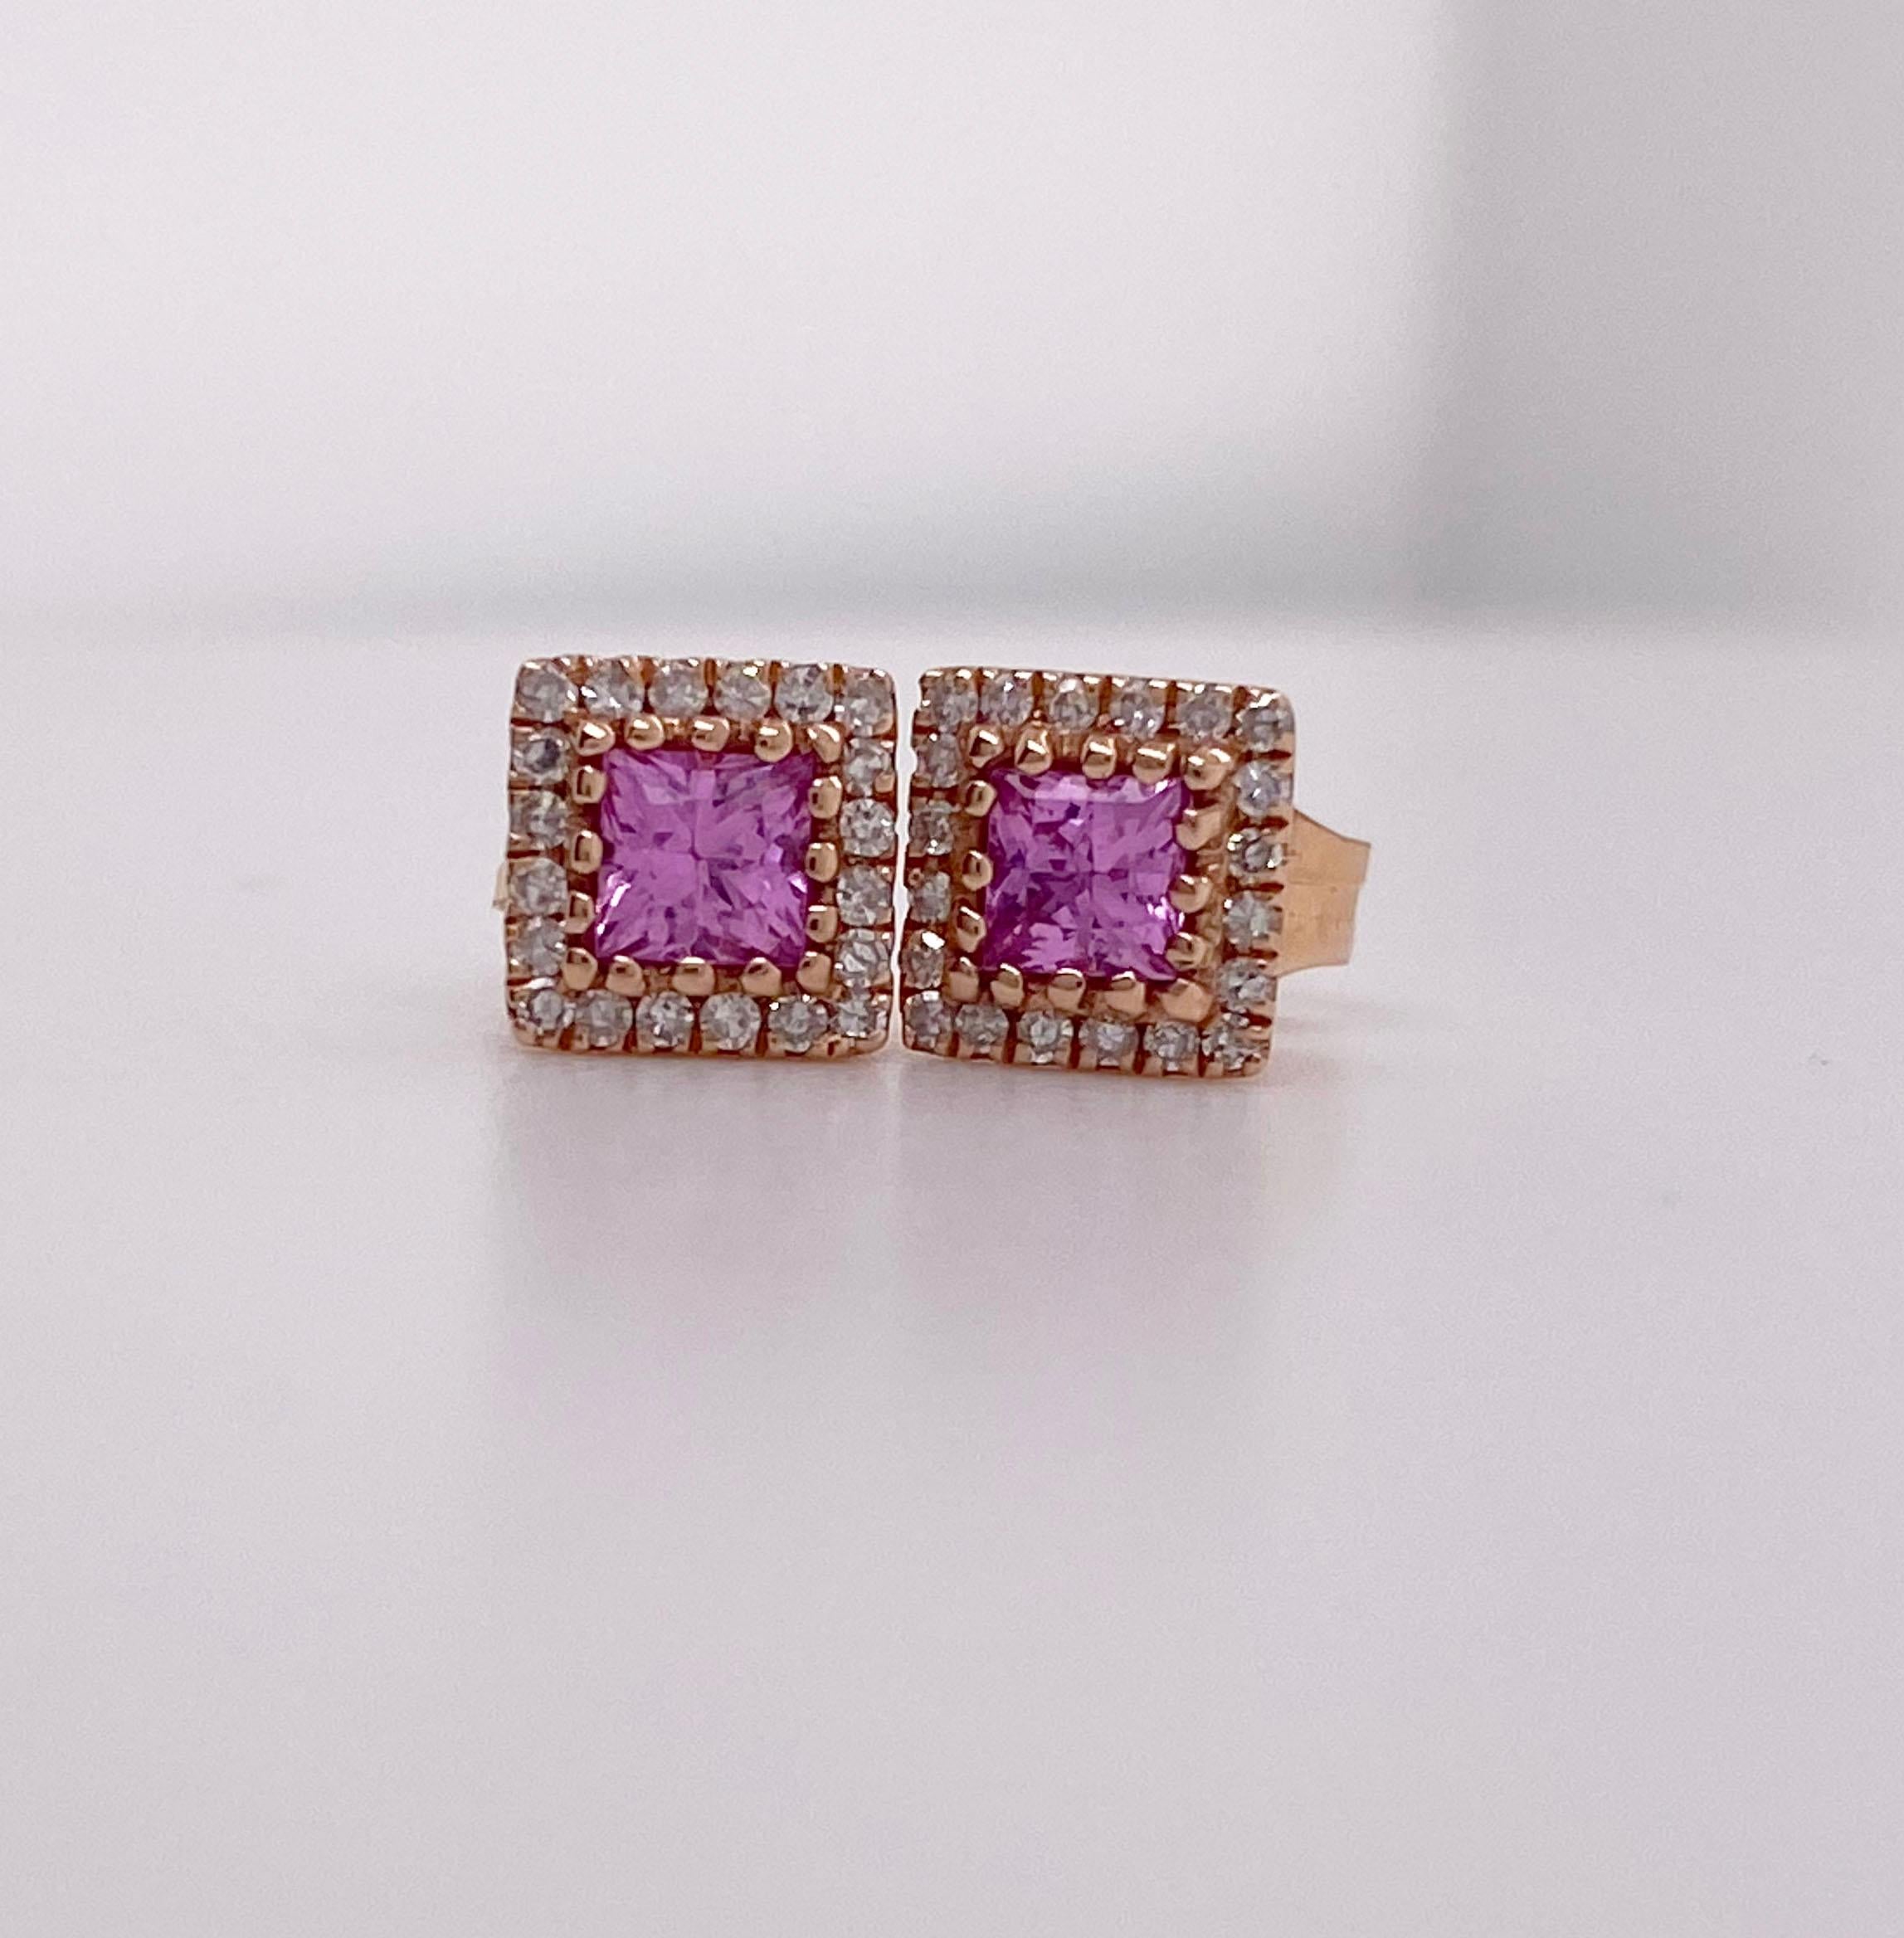 The details for these gorgeous earrings are listed below:
Metal Quality: 14 kt Rose Gold 
Earring Type: Stud 
Diamond Number: 20 
Diamond Total Weight: .15 ct 
Diamond Clarity: VS2 (excellent, eye clean)
Diamond Color: G (excellent, near